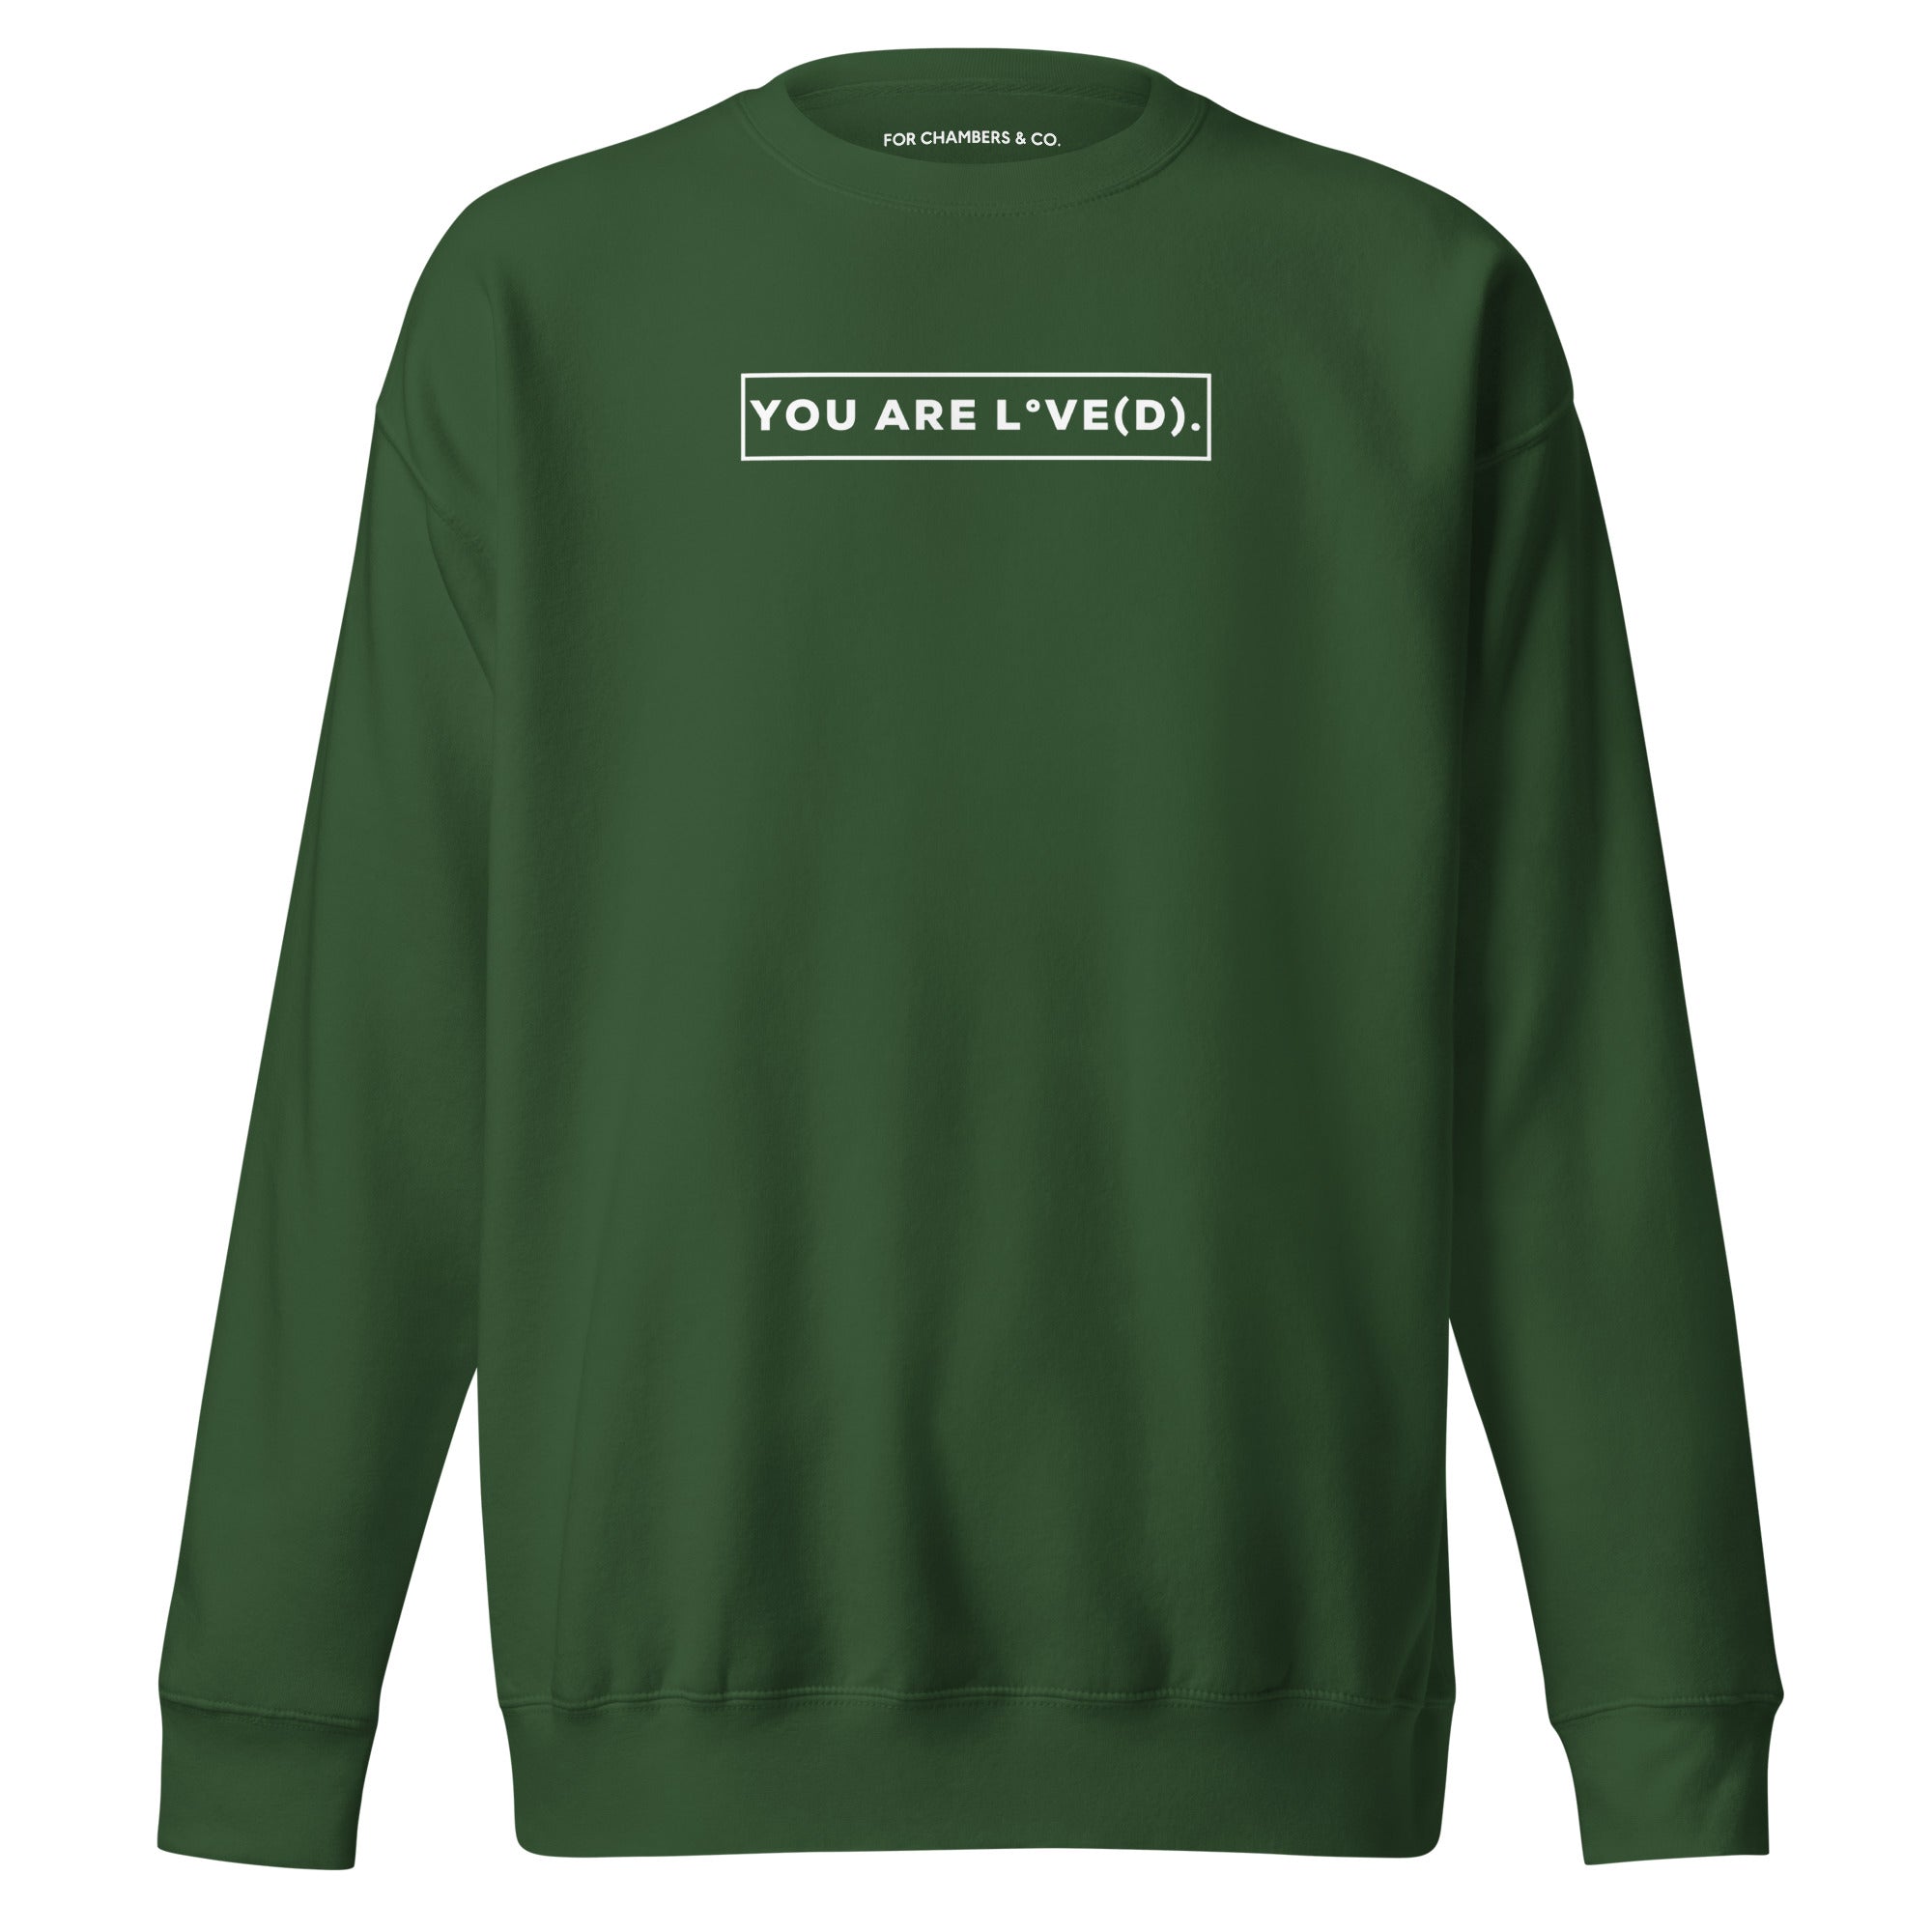 YOU ARE L°VE(D). Sweatshirt in Forest Green